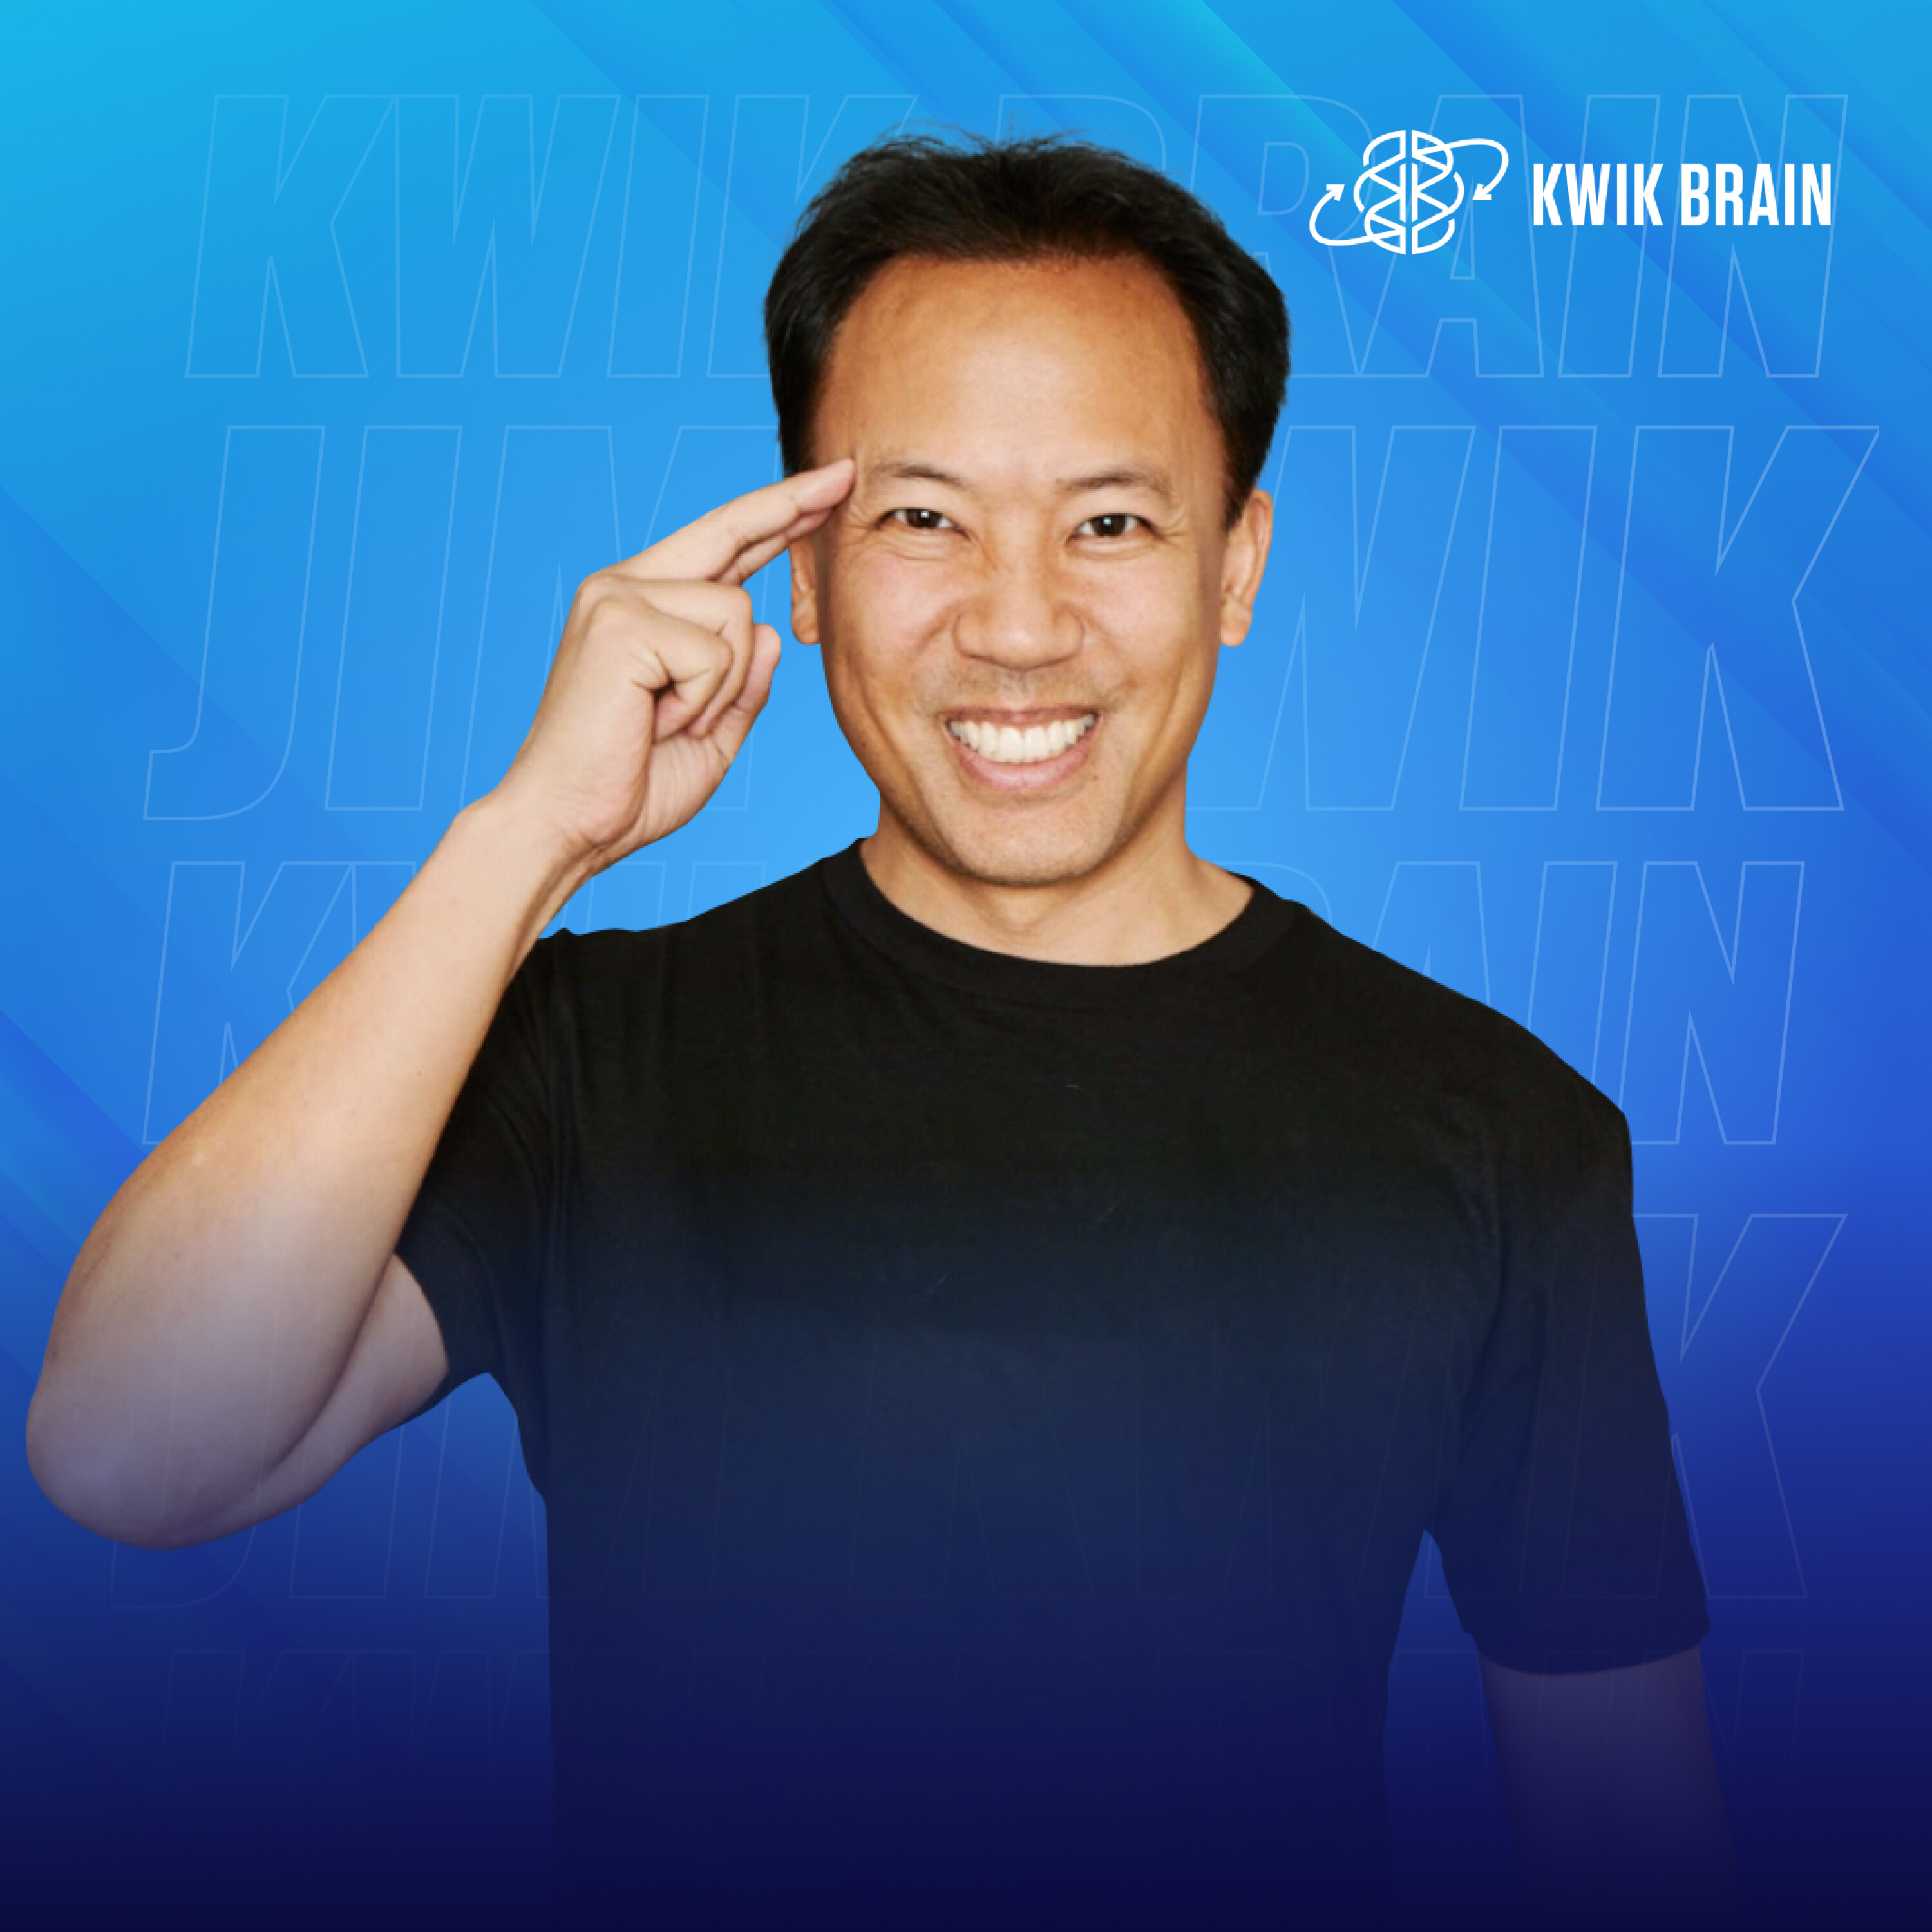 My Workout Routine: The Science of Exercise for a Sharper Mind with Jim Kwik